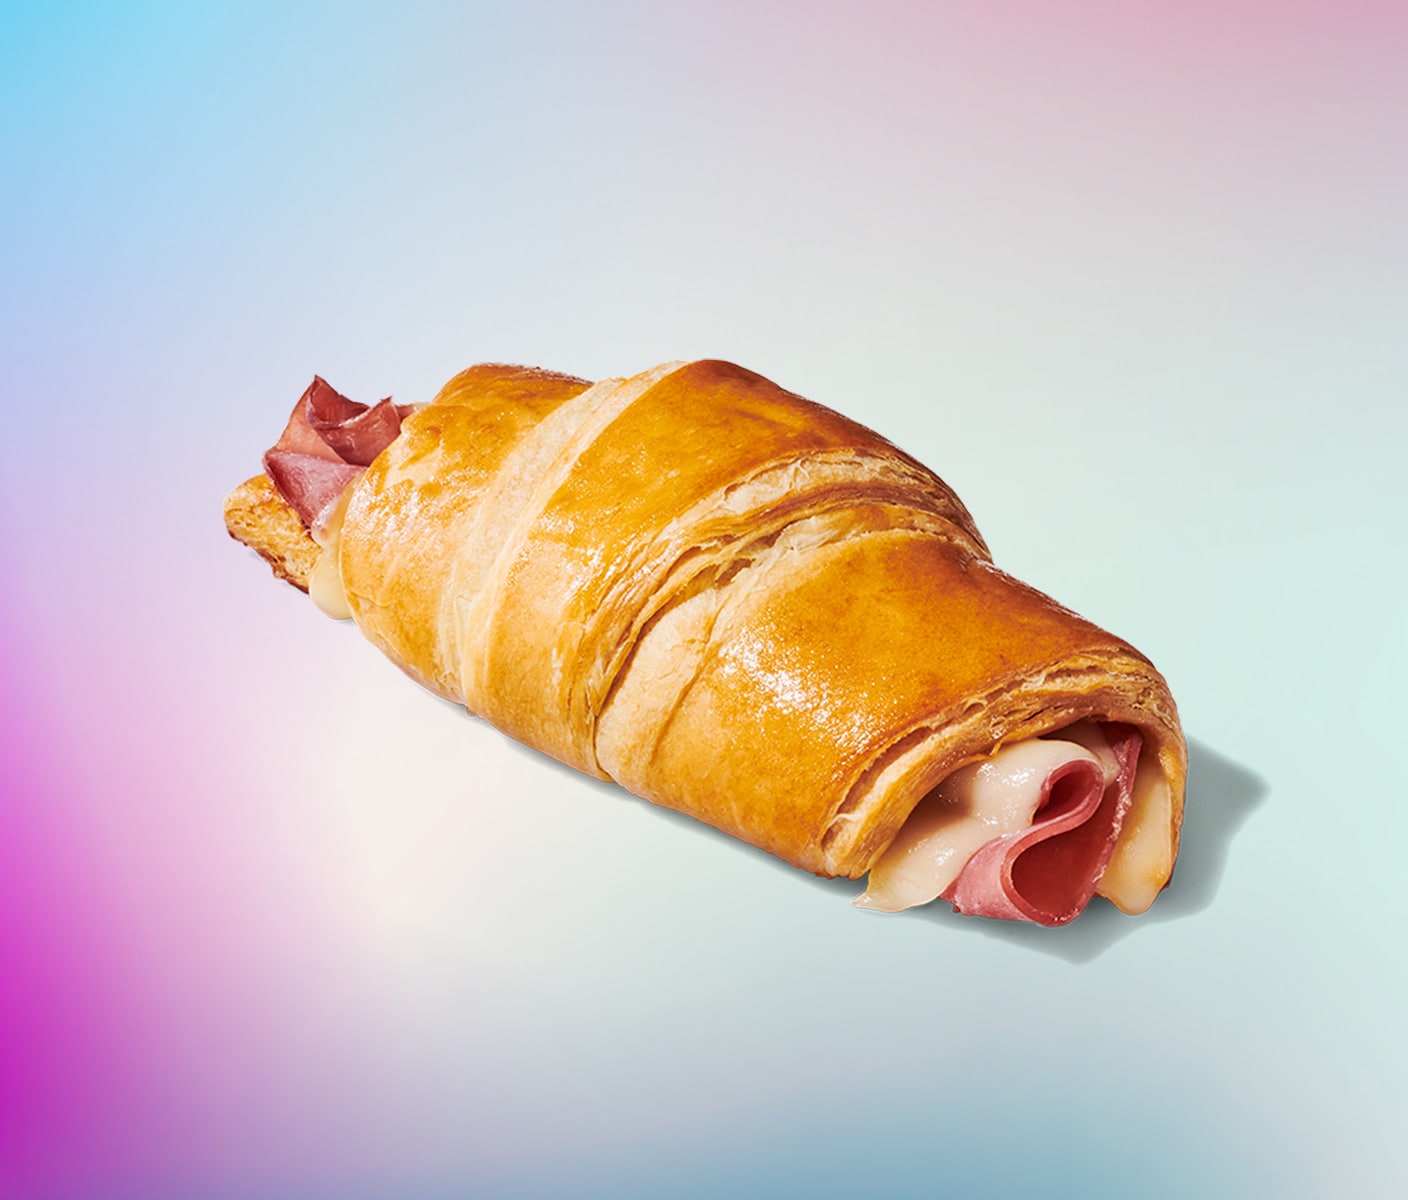 A golden-brown croissant with a ham and swiss cheese filling. 